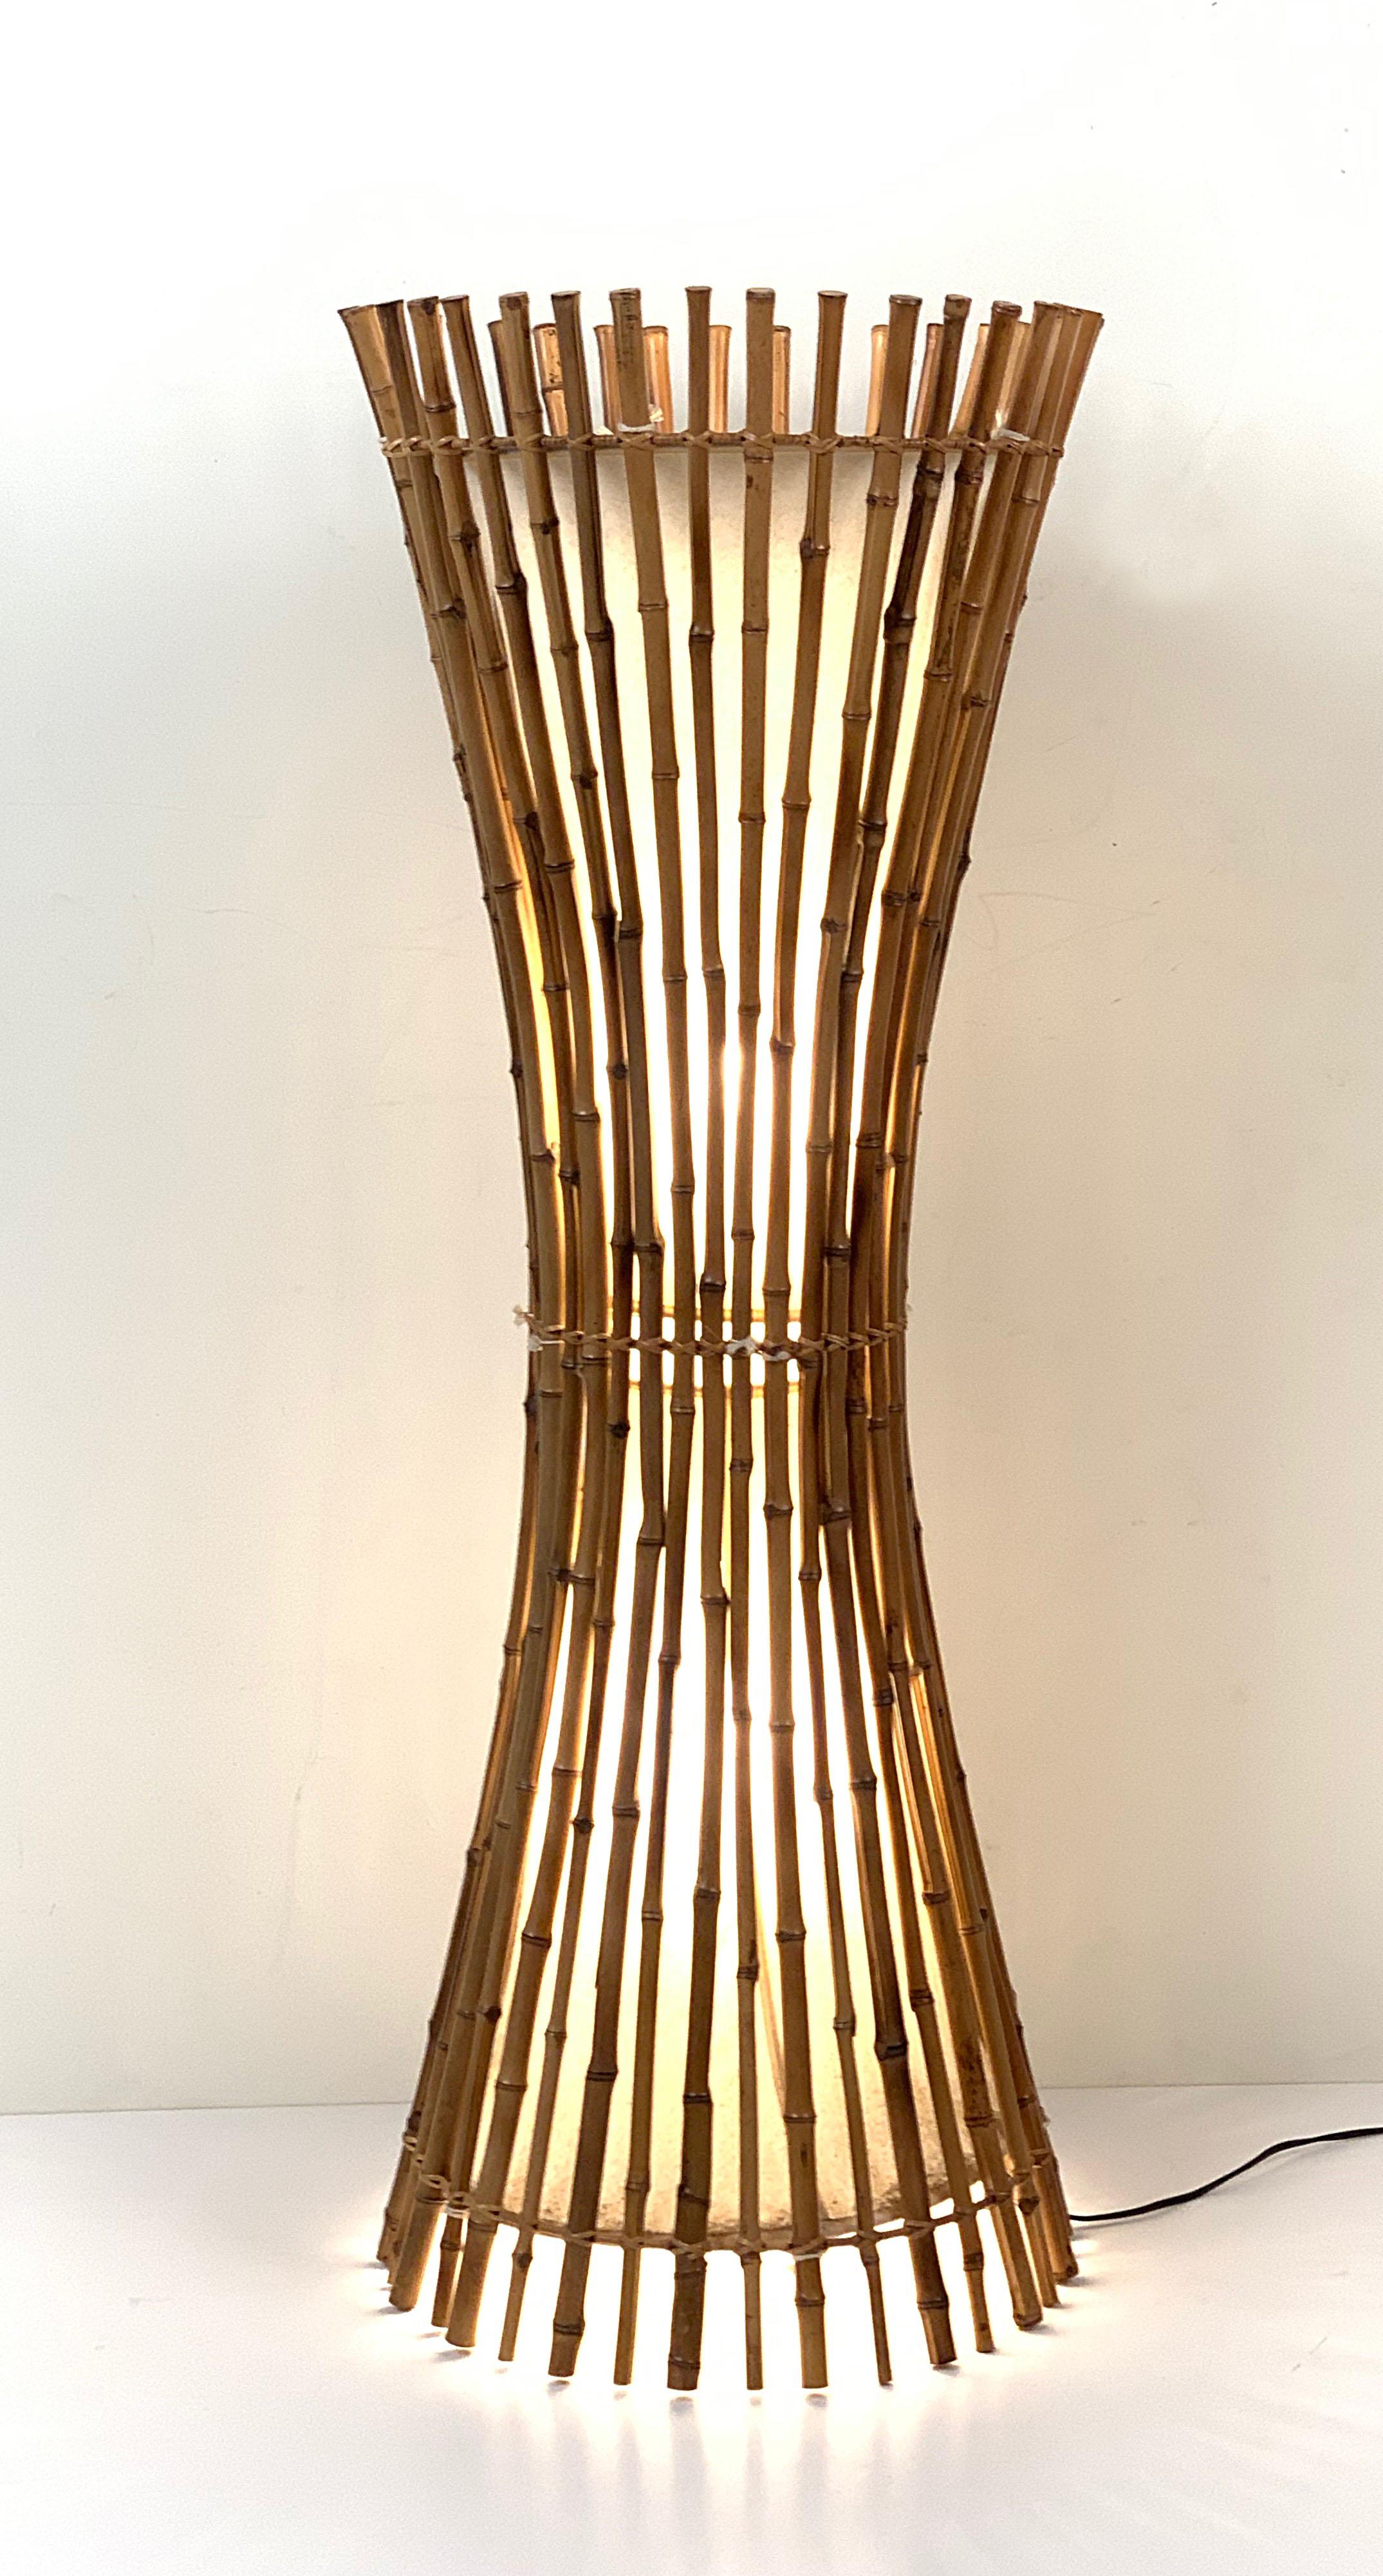 Midcentury Bamboo and Rattan Italian Floor Lamp after Franco Albini, 1960s For Sale 7